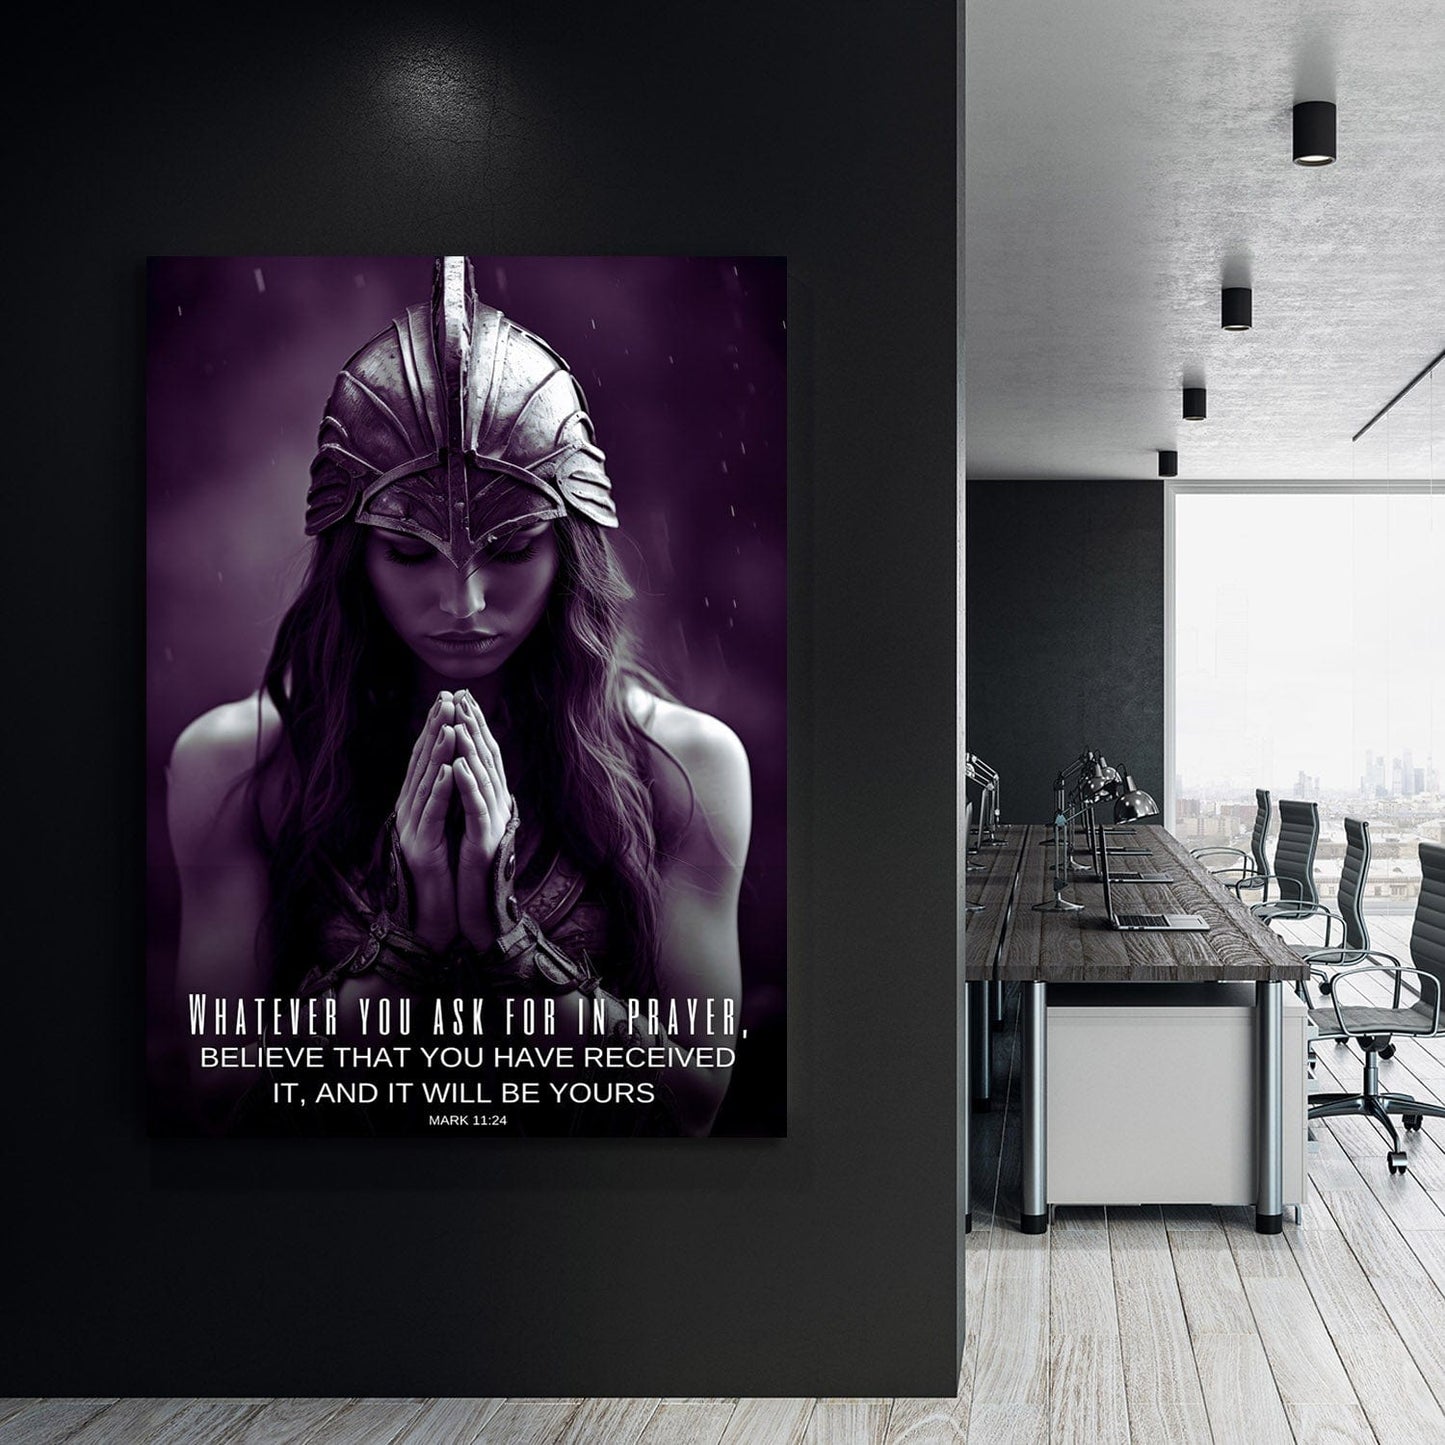 Female Warrior - Whatever you ask for in prayer, believe that you have received it - Mark 11:24 Scripture Wall Art | Inspirational Wall Art Motivational Wall Art Quotes Office Art | ImpaktMaker Exclusive Canvas Art Portrait